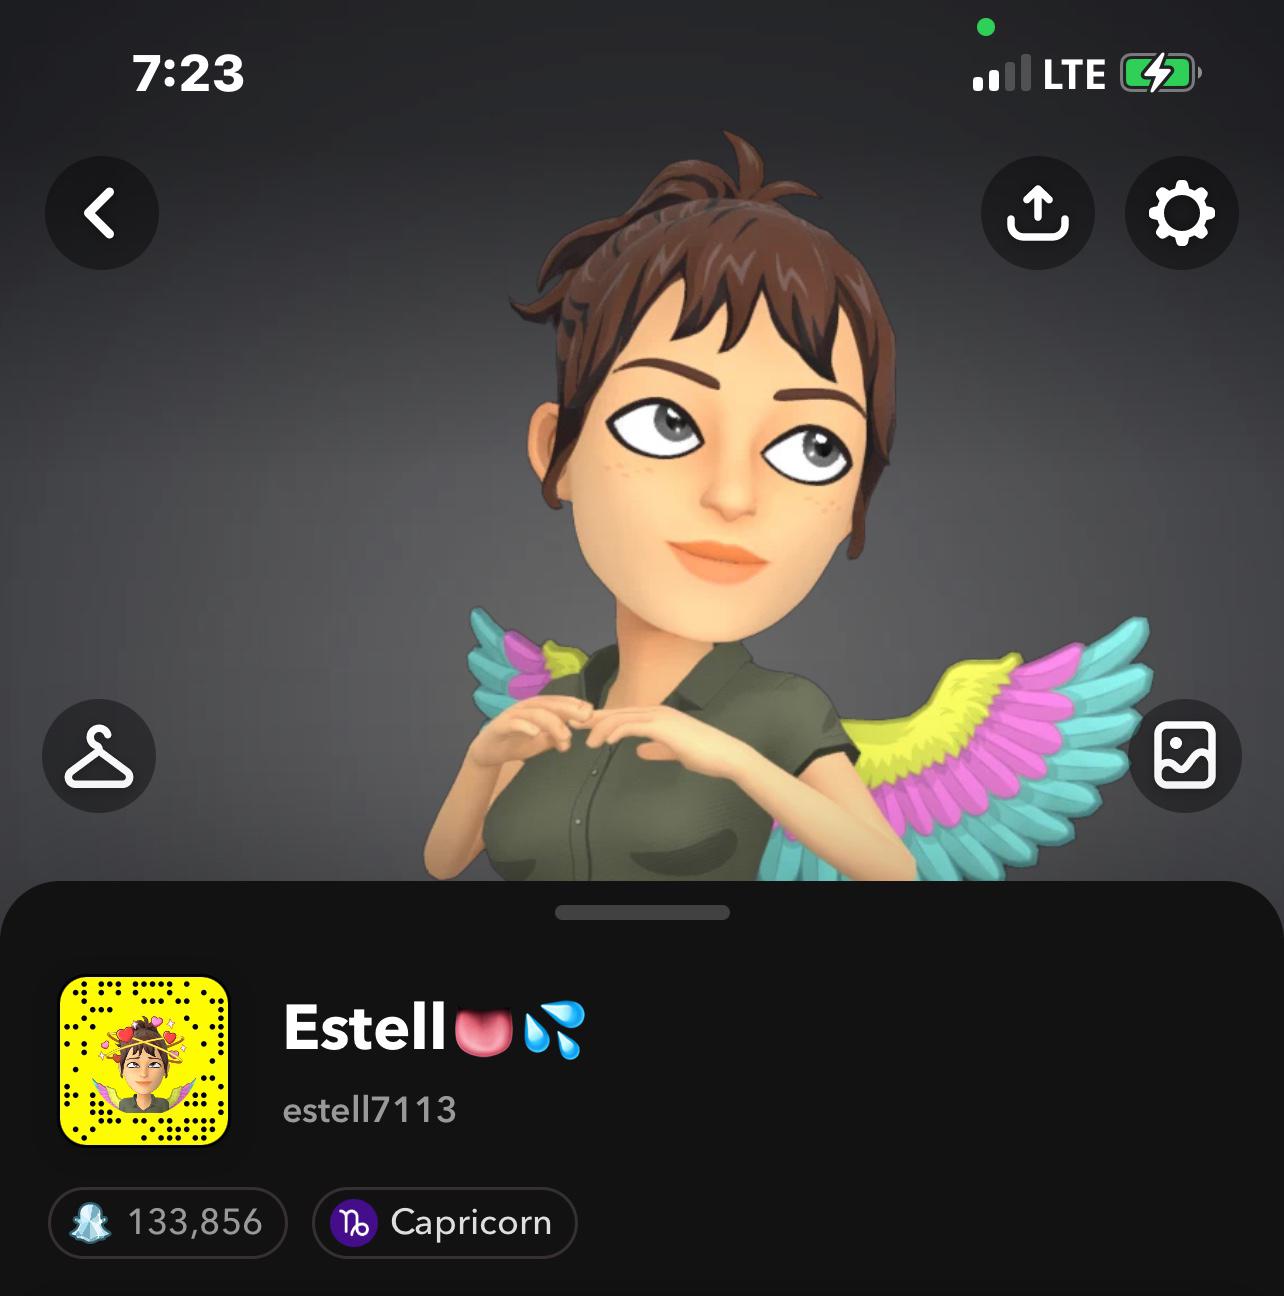 HMU if you’re DTF with your location and ask for my rate Snap:estell7113